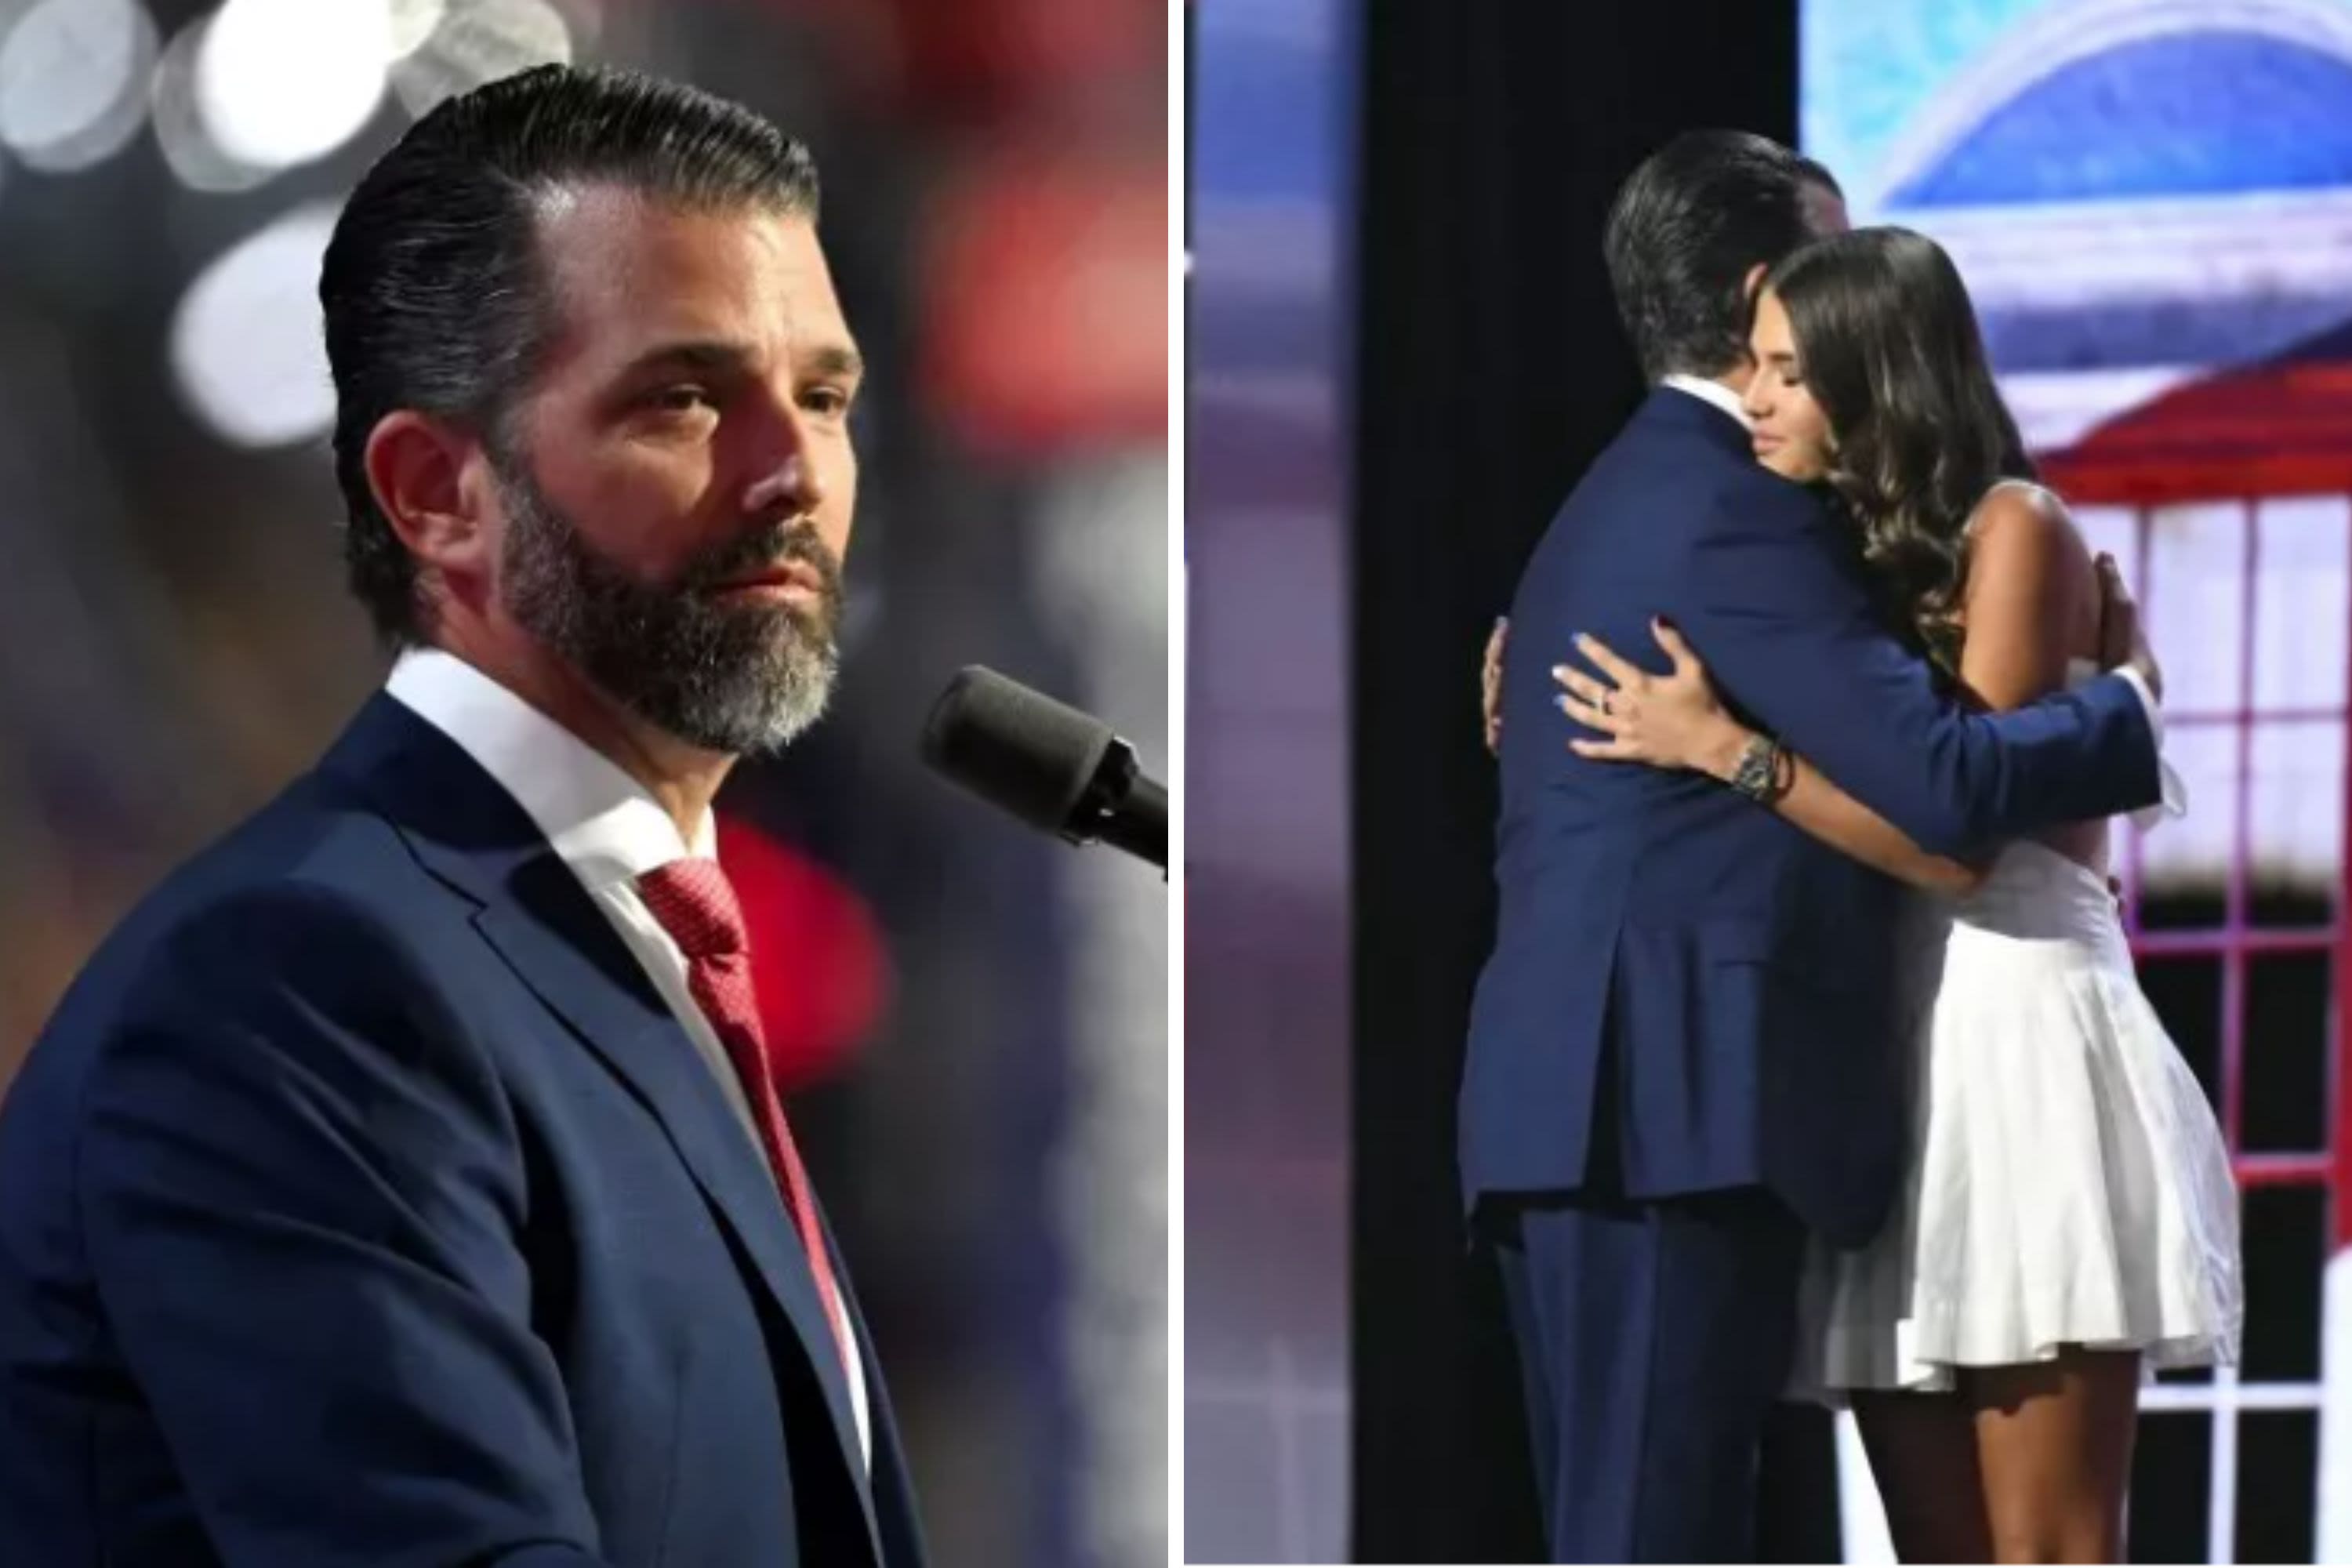 Donald Trump Jr. tells RNC his father has 'the heart of a lion'